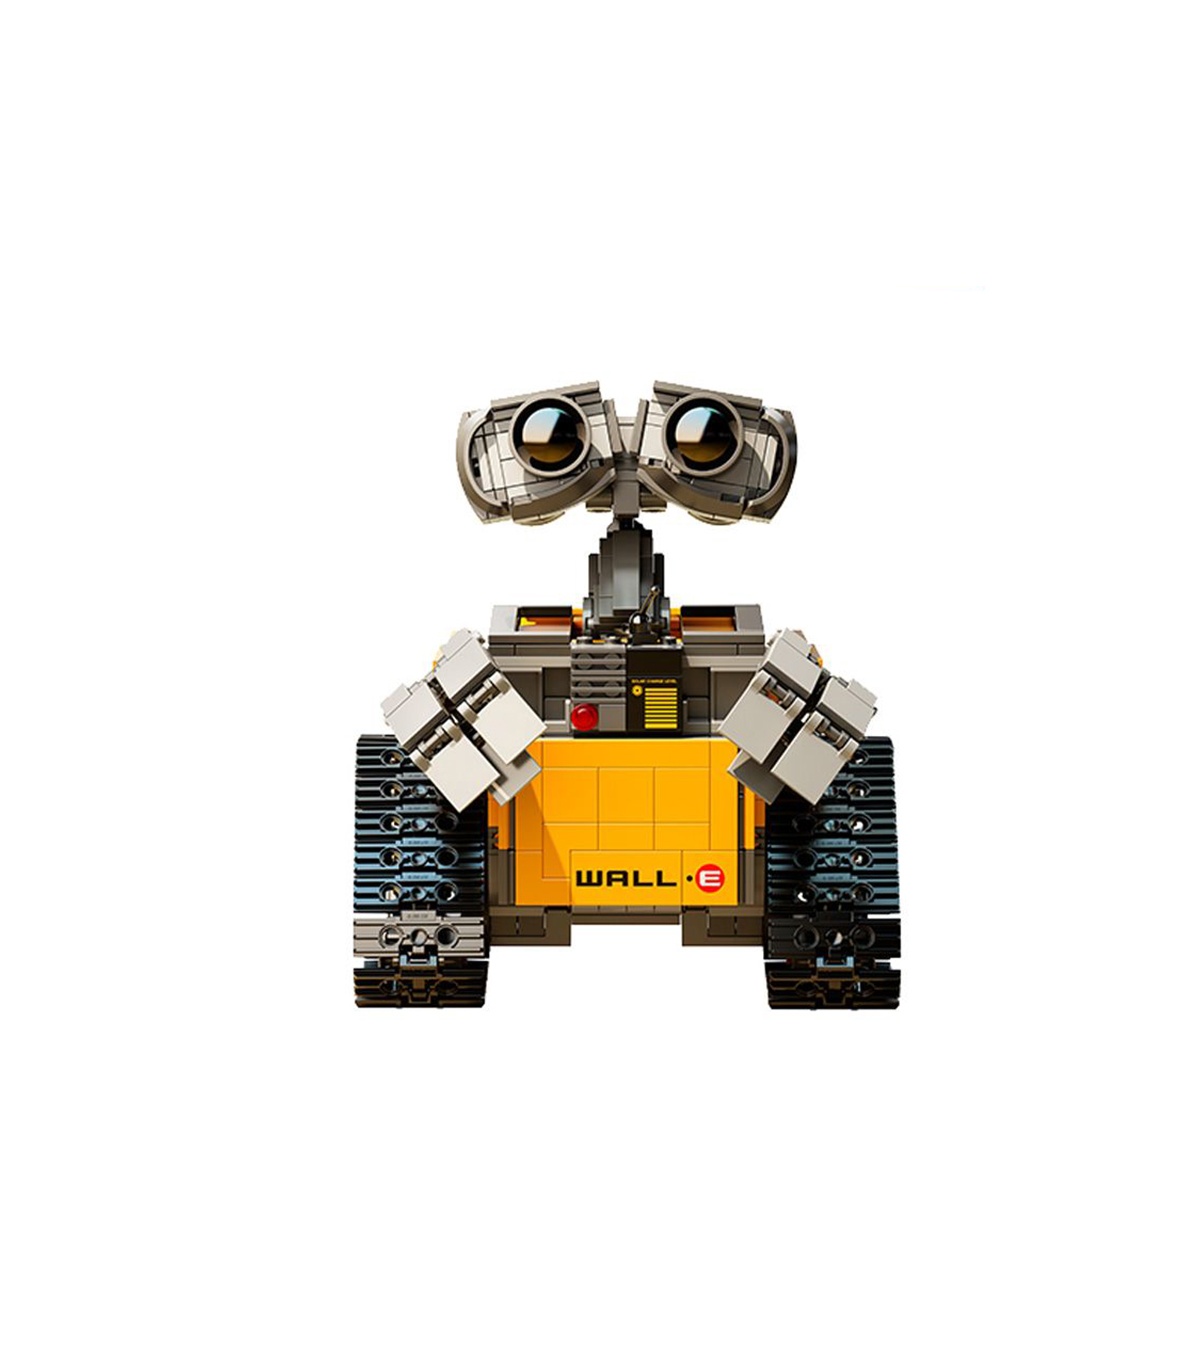 Wall E Robot New Lego Building Block Gift Games Figure Action Pixar Toy Model 